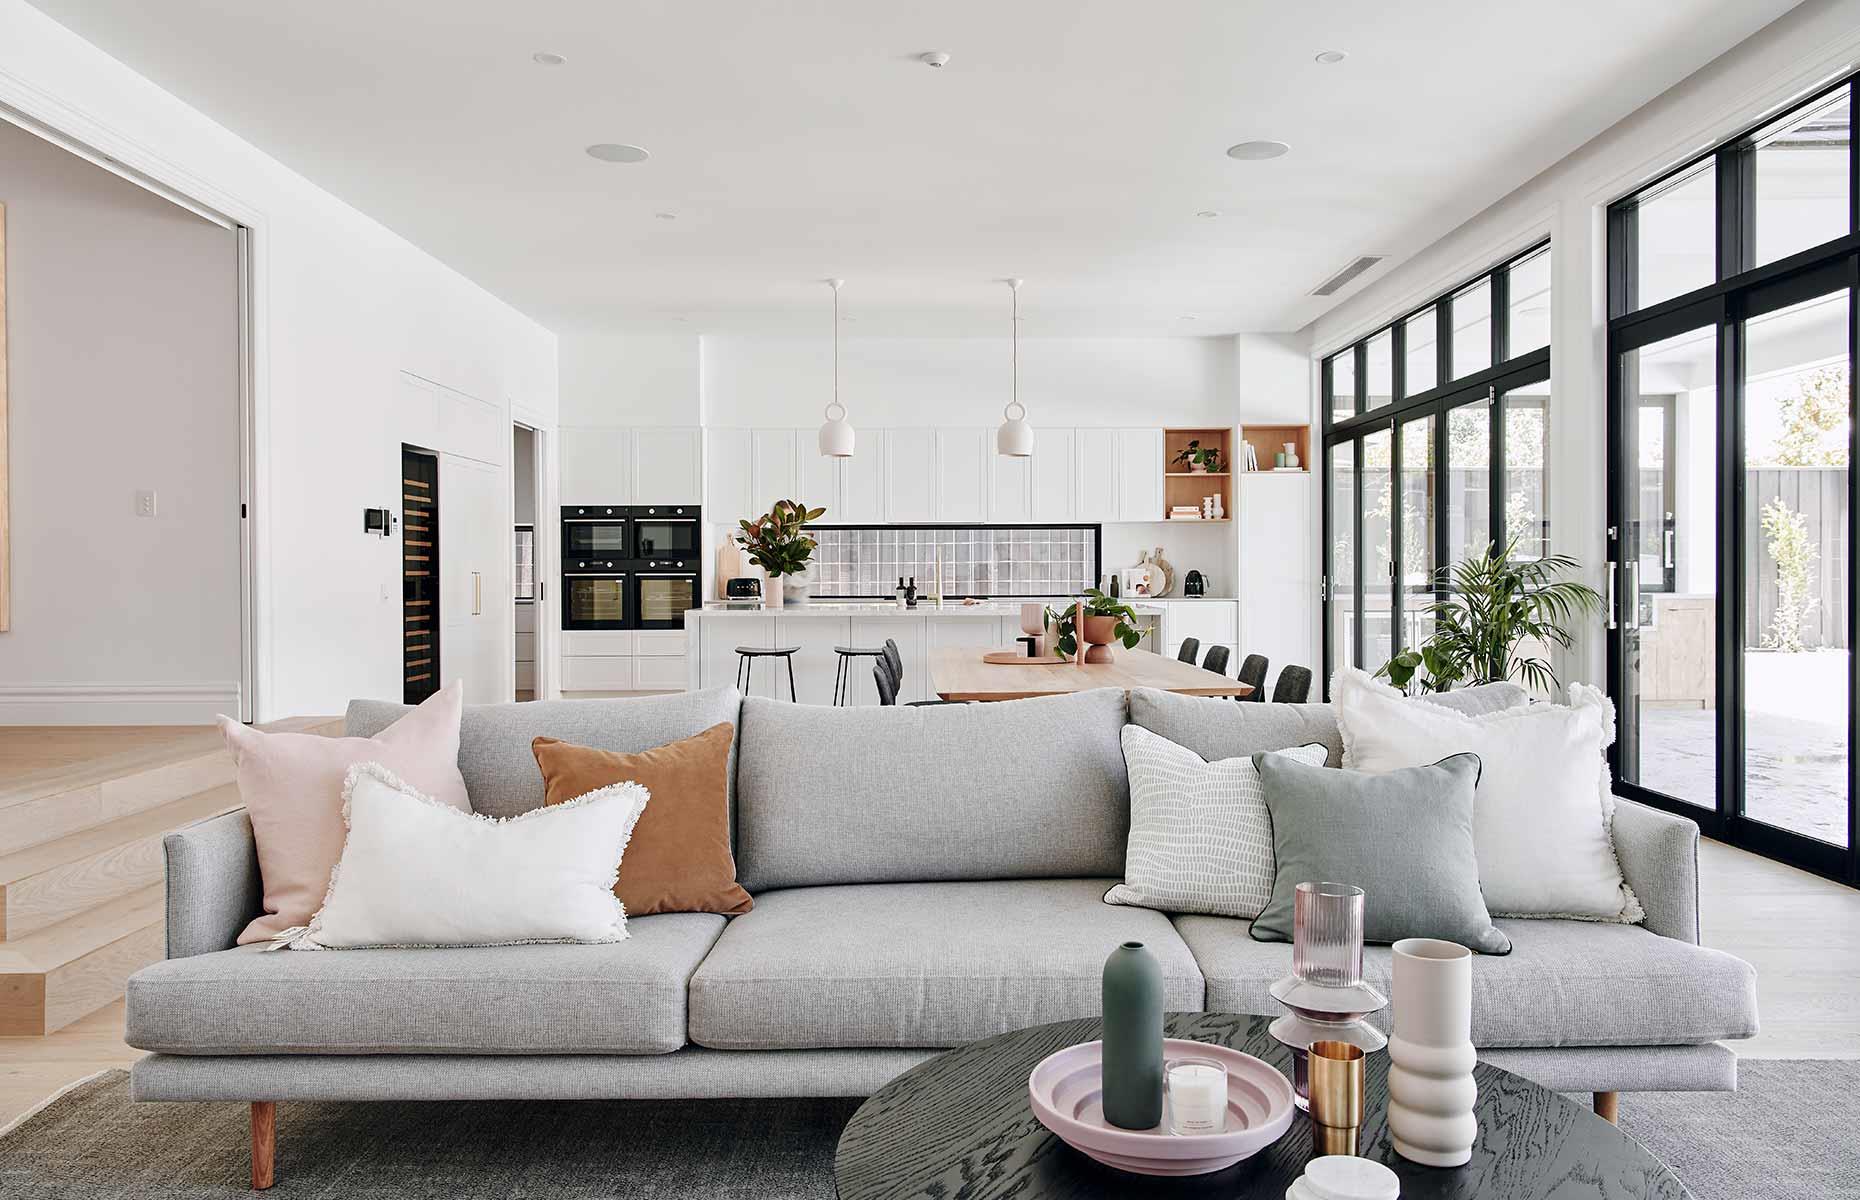 Use furniture to zone off an airy open-plan space in need of structure. This modern living area is divided into thirds thanks to carefully arranged fixtures – the breakfast bar separates the kitchen and dining zones, while the sofa creates an intimate seating nook that’s distanced from the busy culinary space.